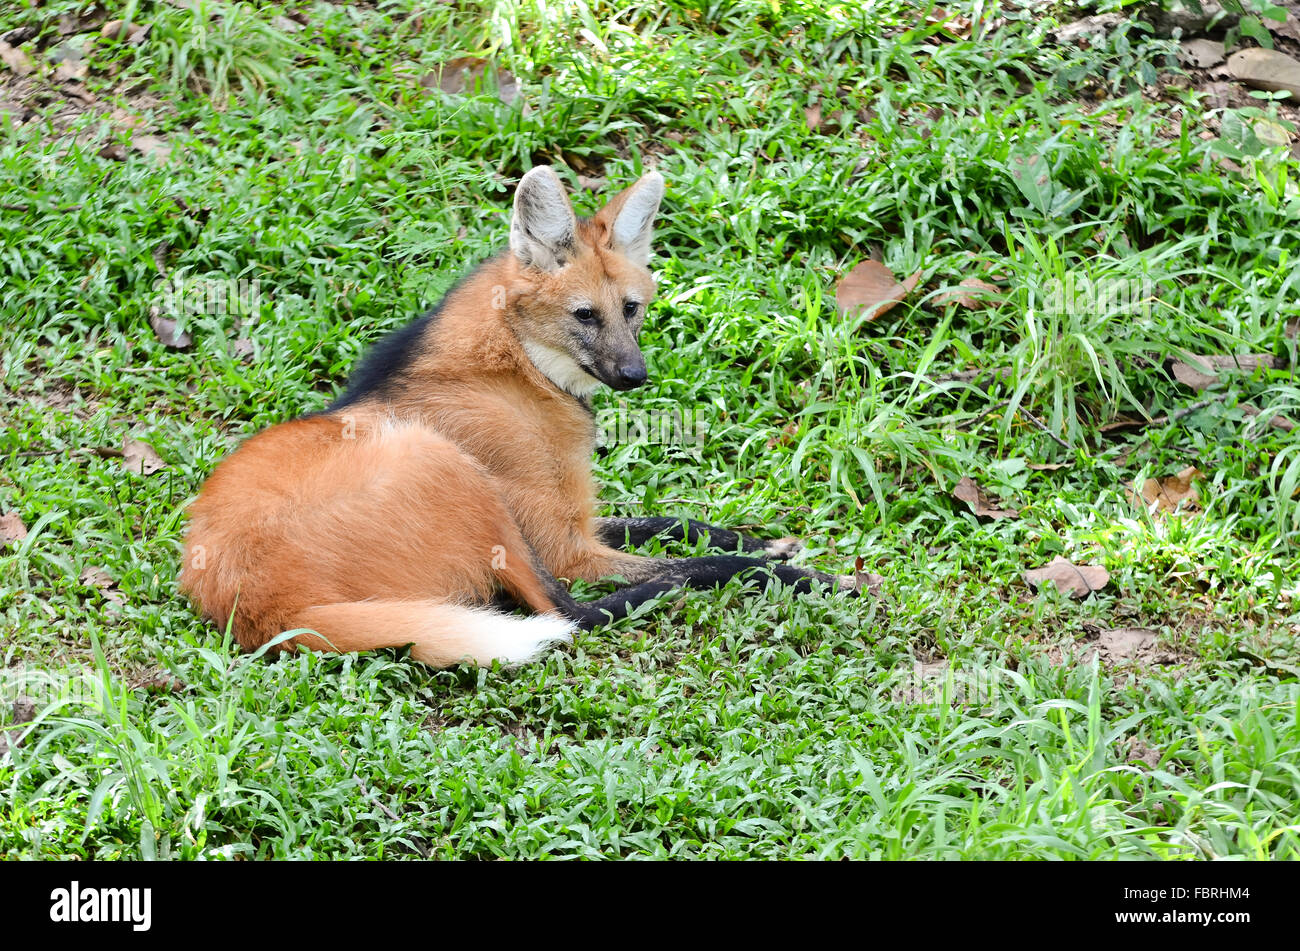 maned wolf lay down on grass Stock Photo